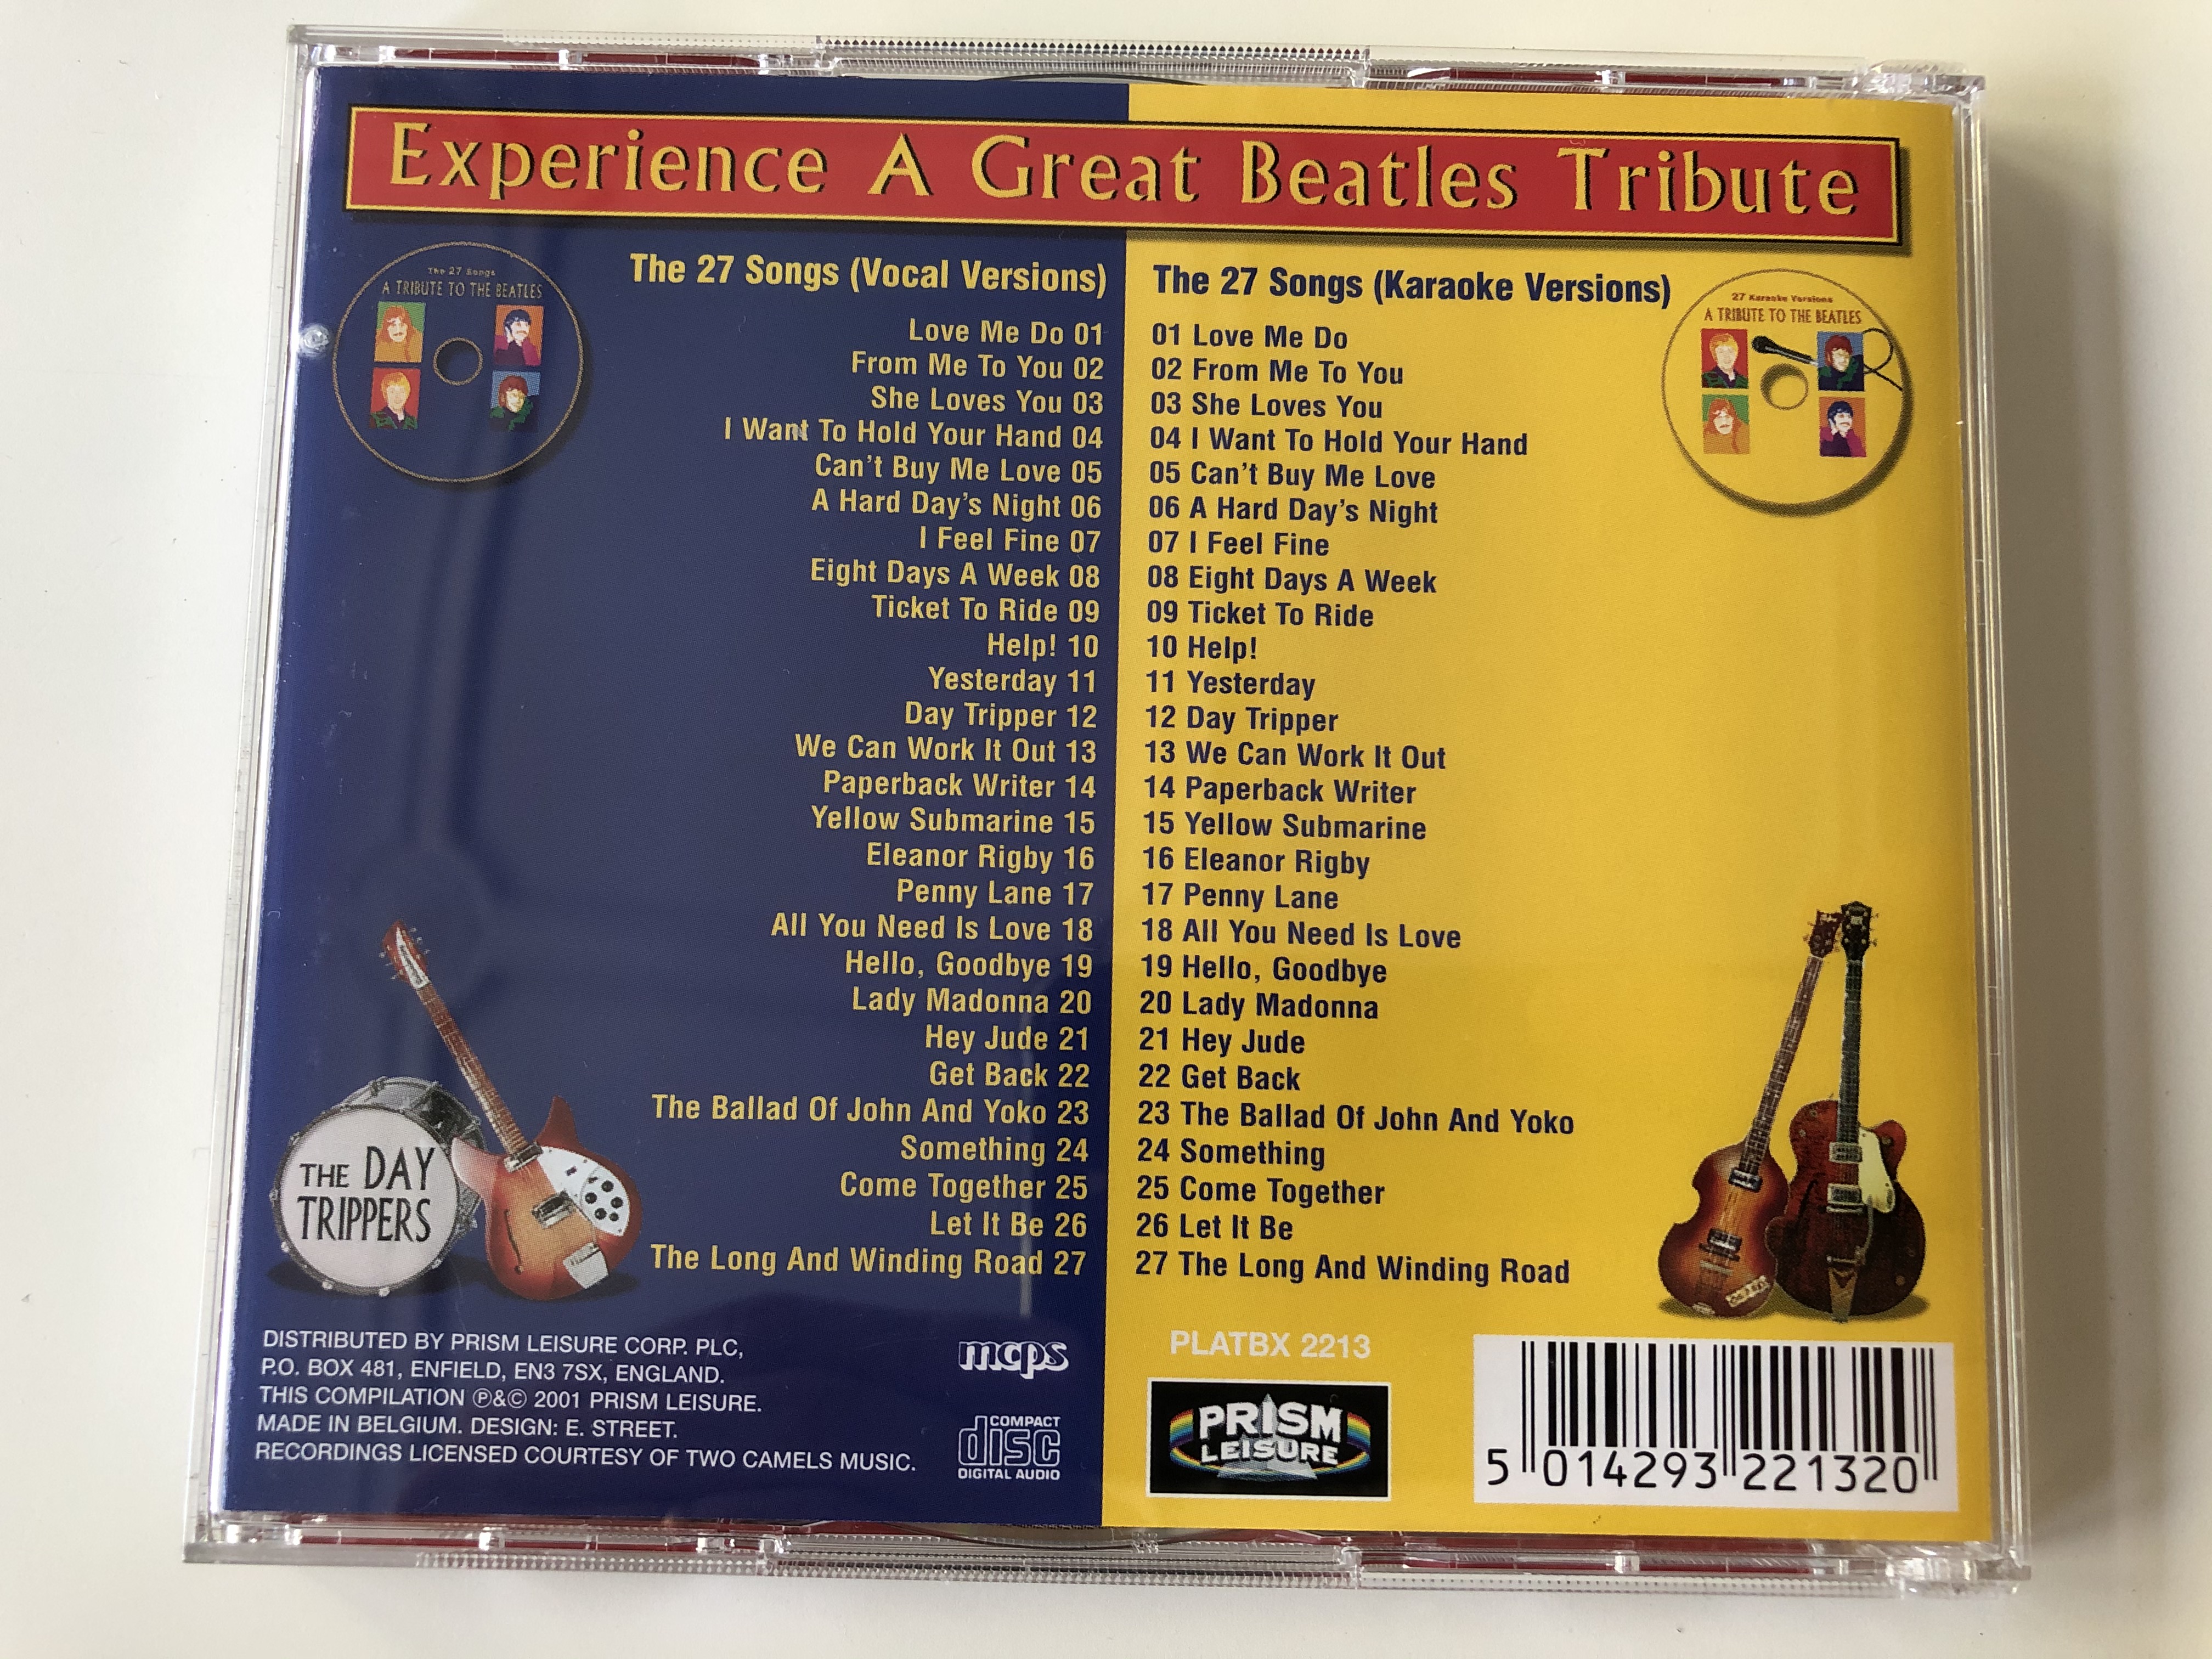 a-tribute-to-the-beatles-featuring-the-27-songs-27-karaoke-versions-performed-by-the-day-trippers-prism-leisure-2x-audio-cd-2001-platbx-2213-6-.jpg